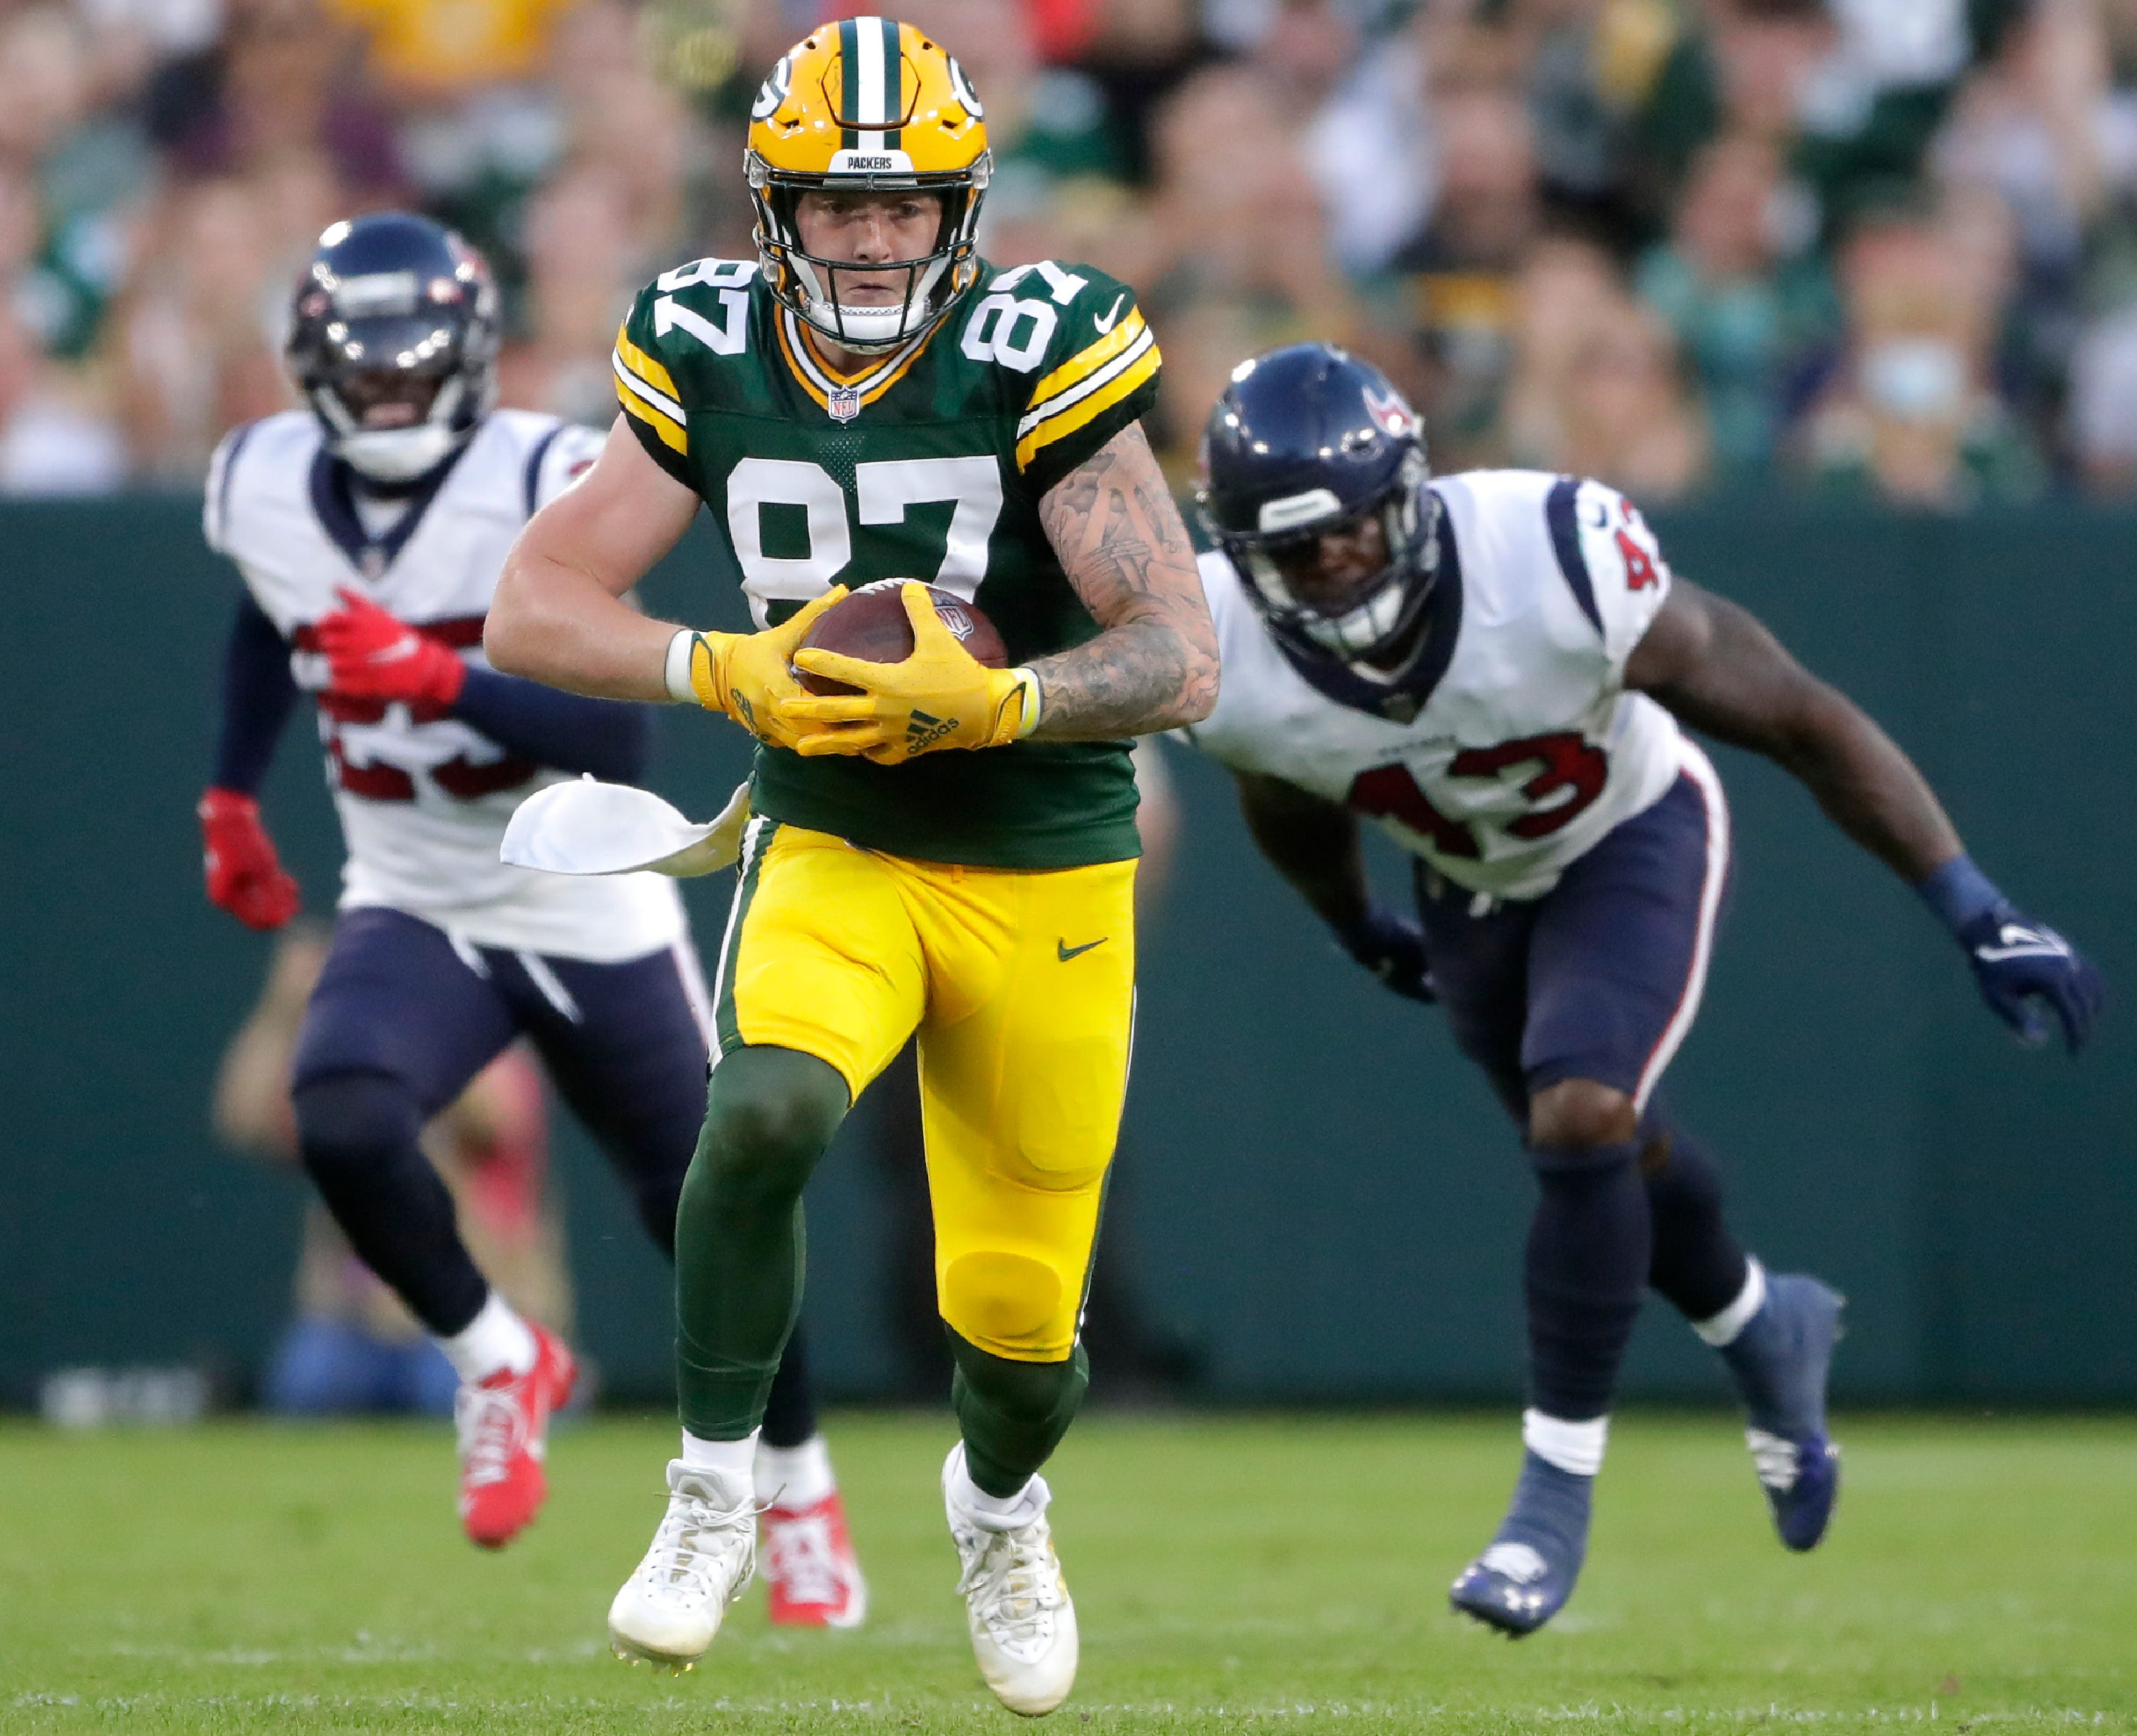 Green Bay Packers tight end Jace Sternberger (87) runs following a catch against the Houston Texans during a preseason game on Saturday, Aug. 14, 2021, at Lambeau Field in Green Bay.